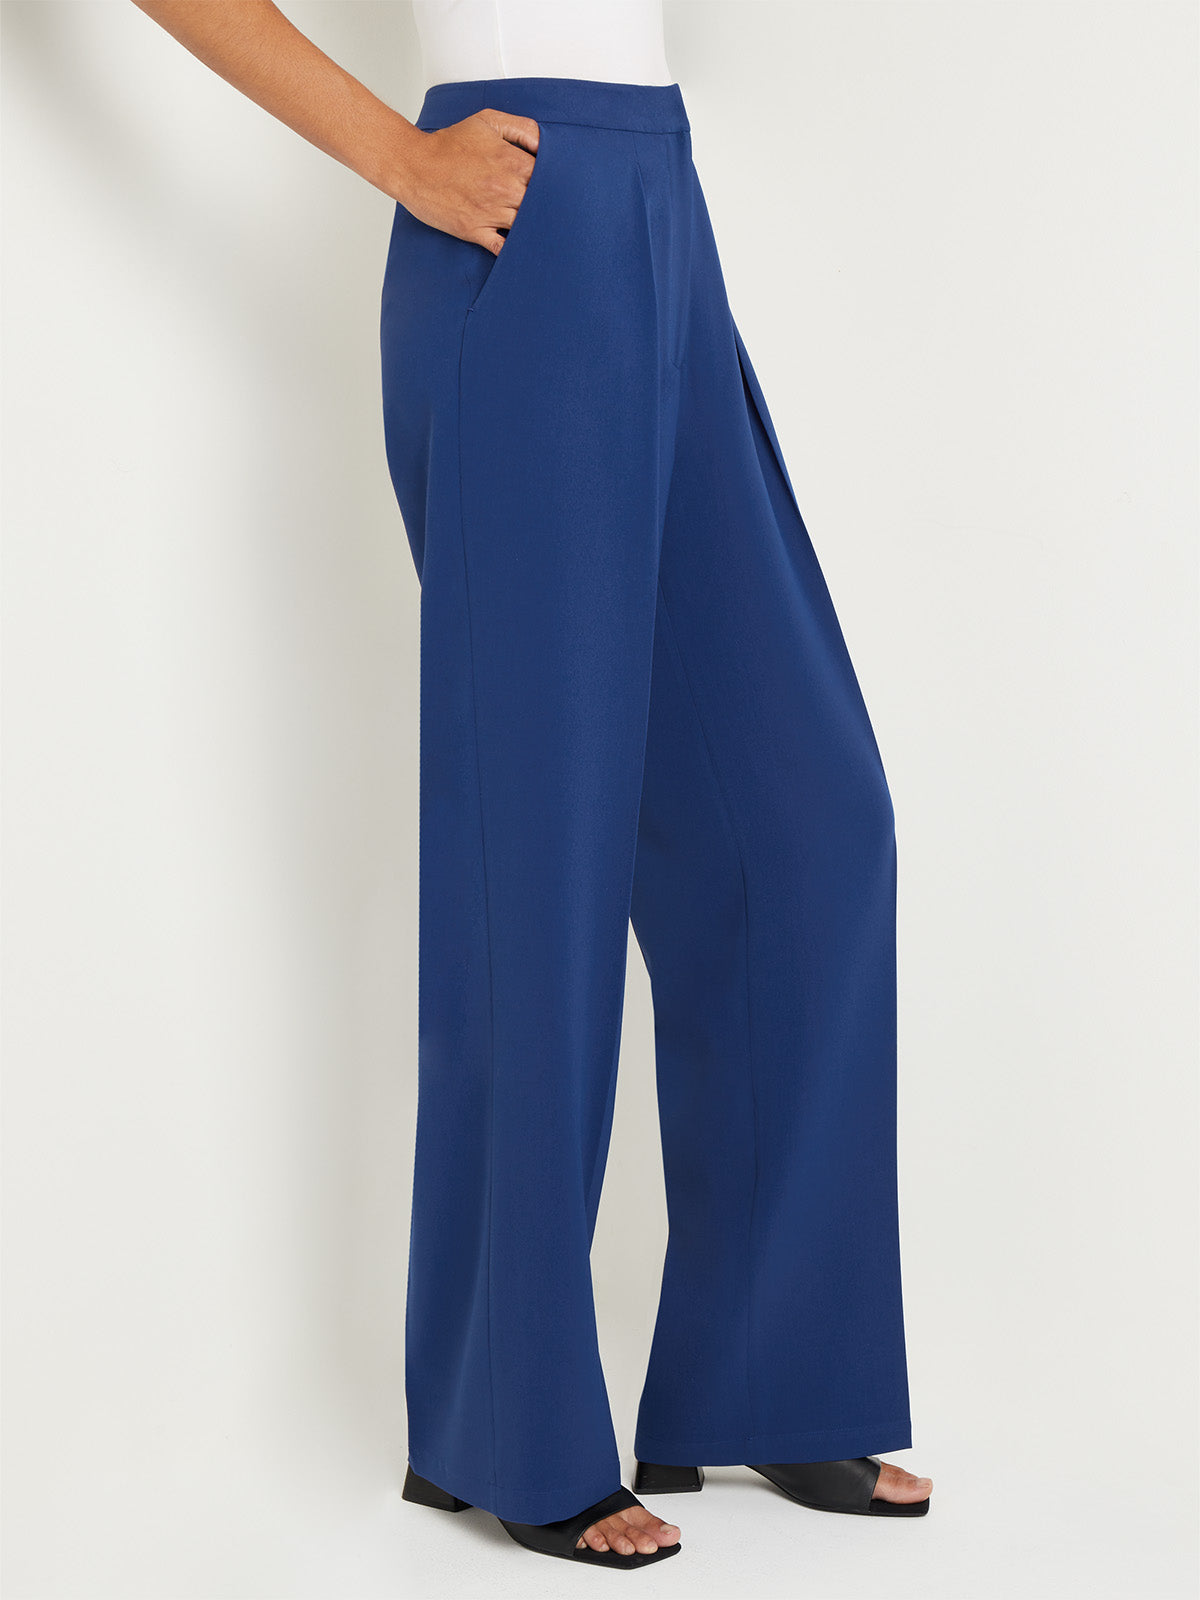 Woven Twill Tailored Wide Leg Pant